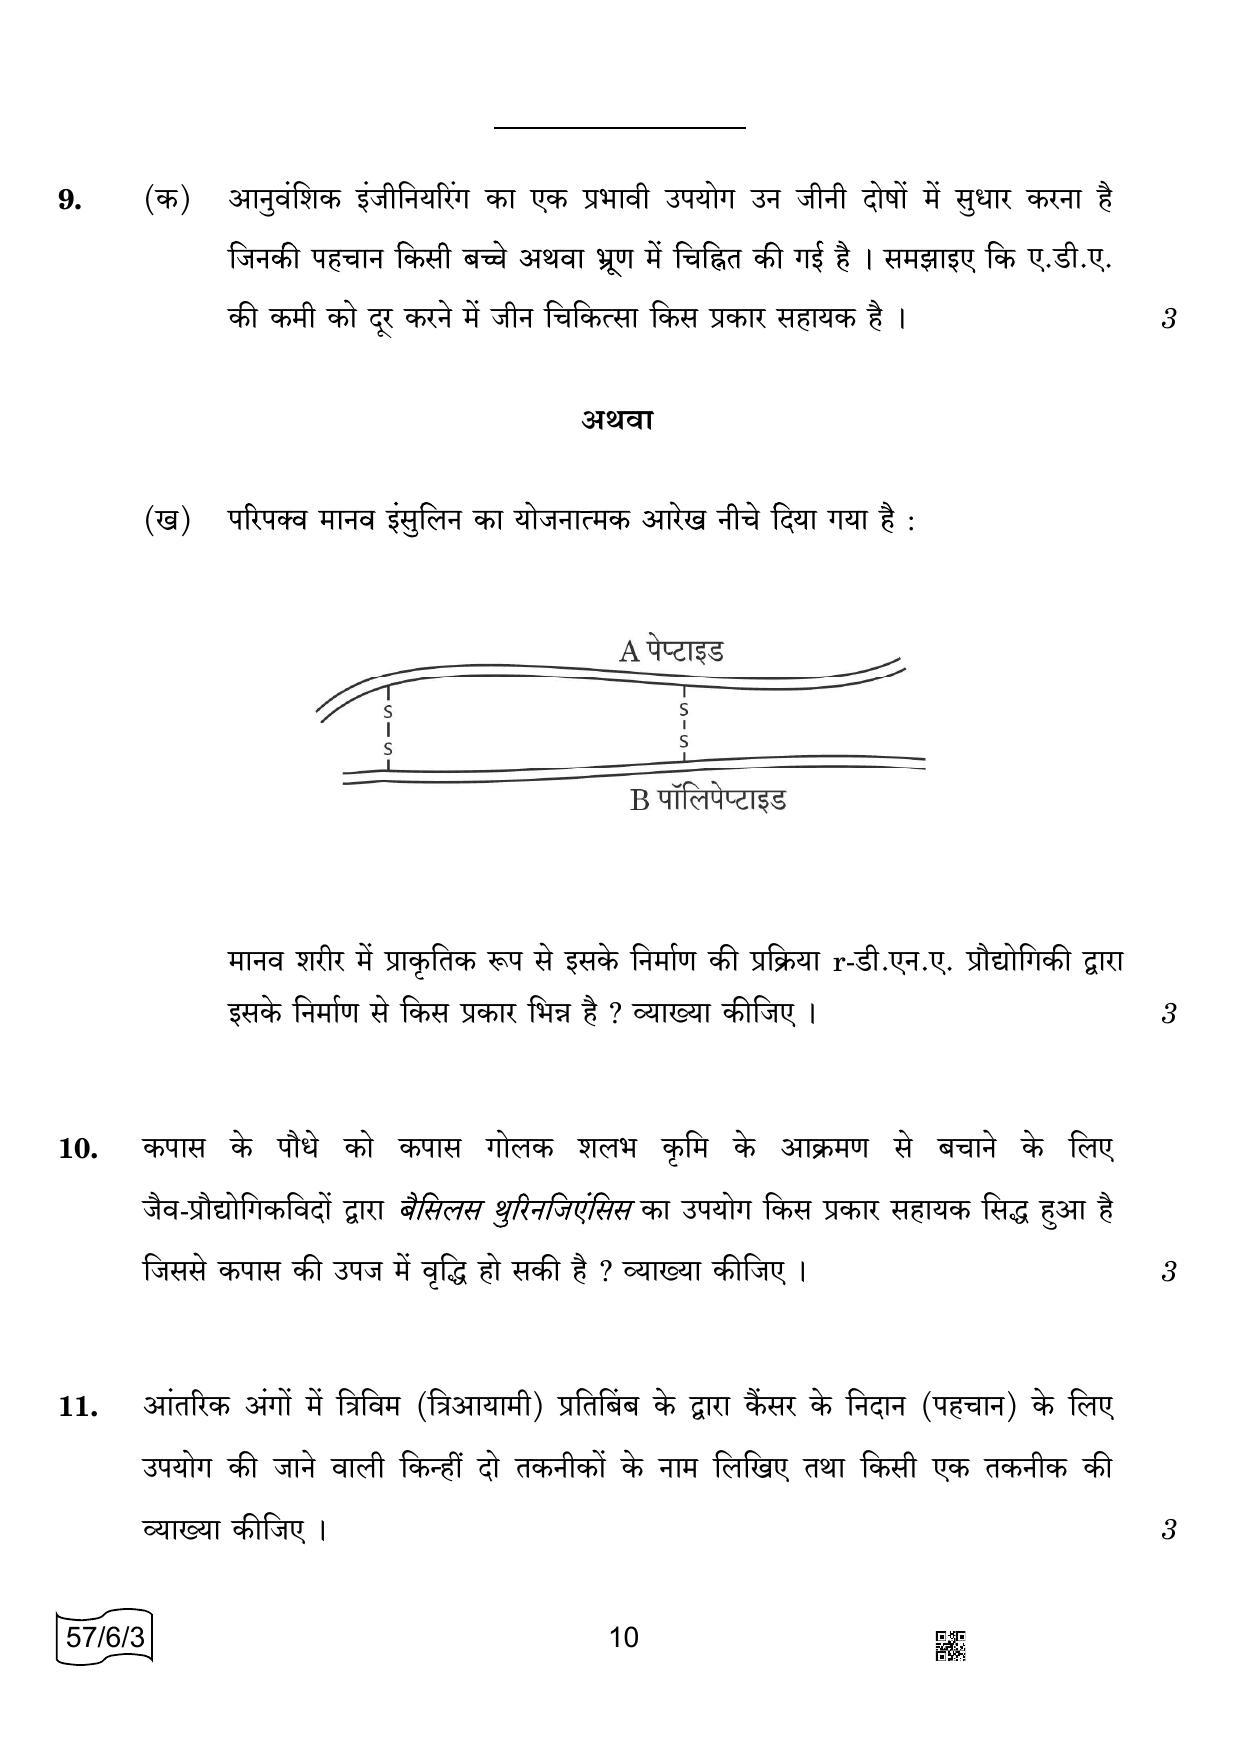 CBSE Class 12 57-6-3 BIOLOGY 2022 Compartment Question Paper - Page 10